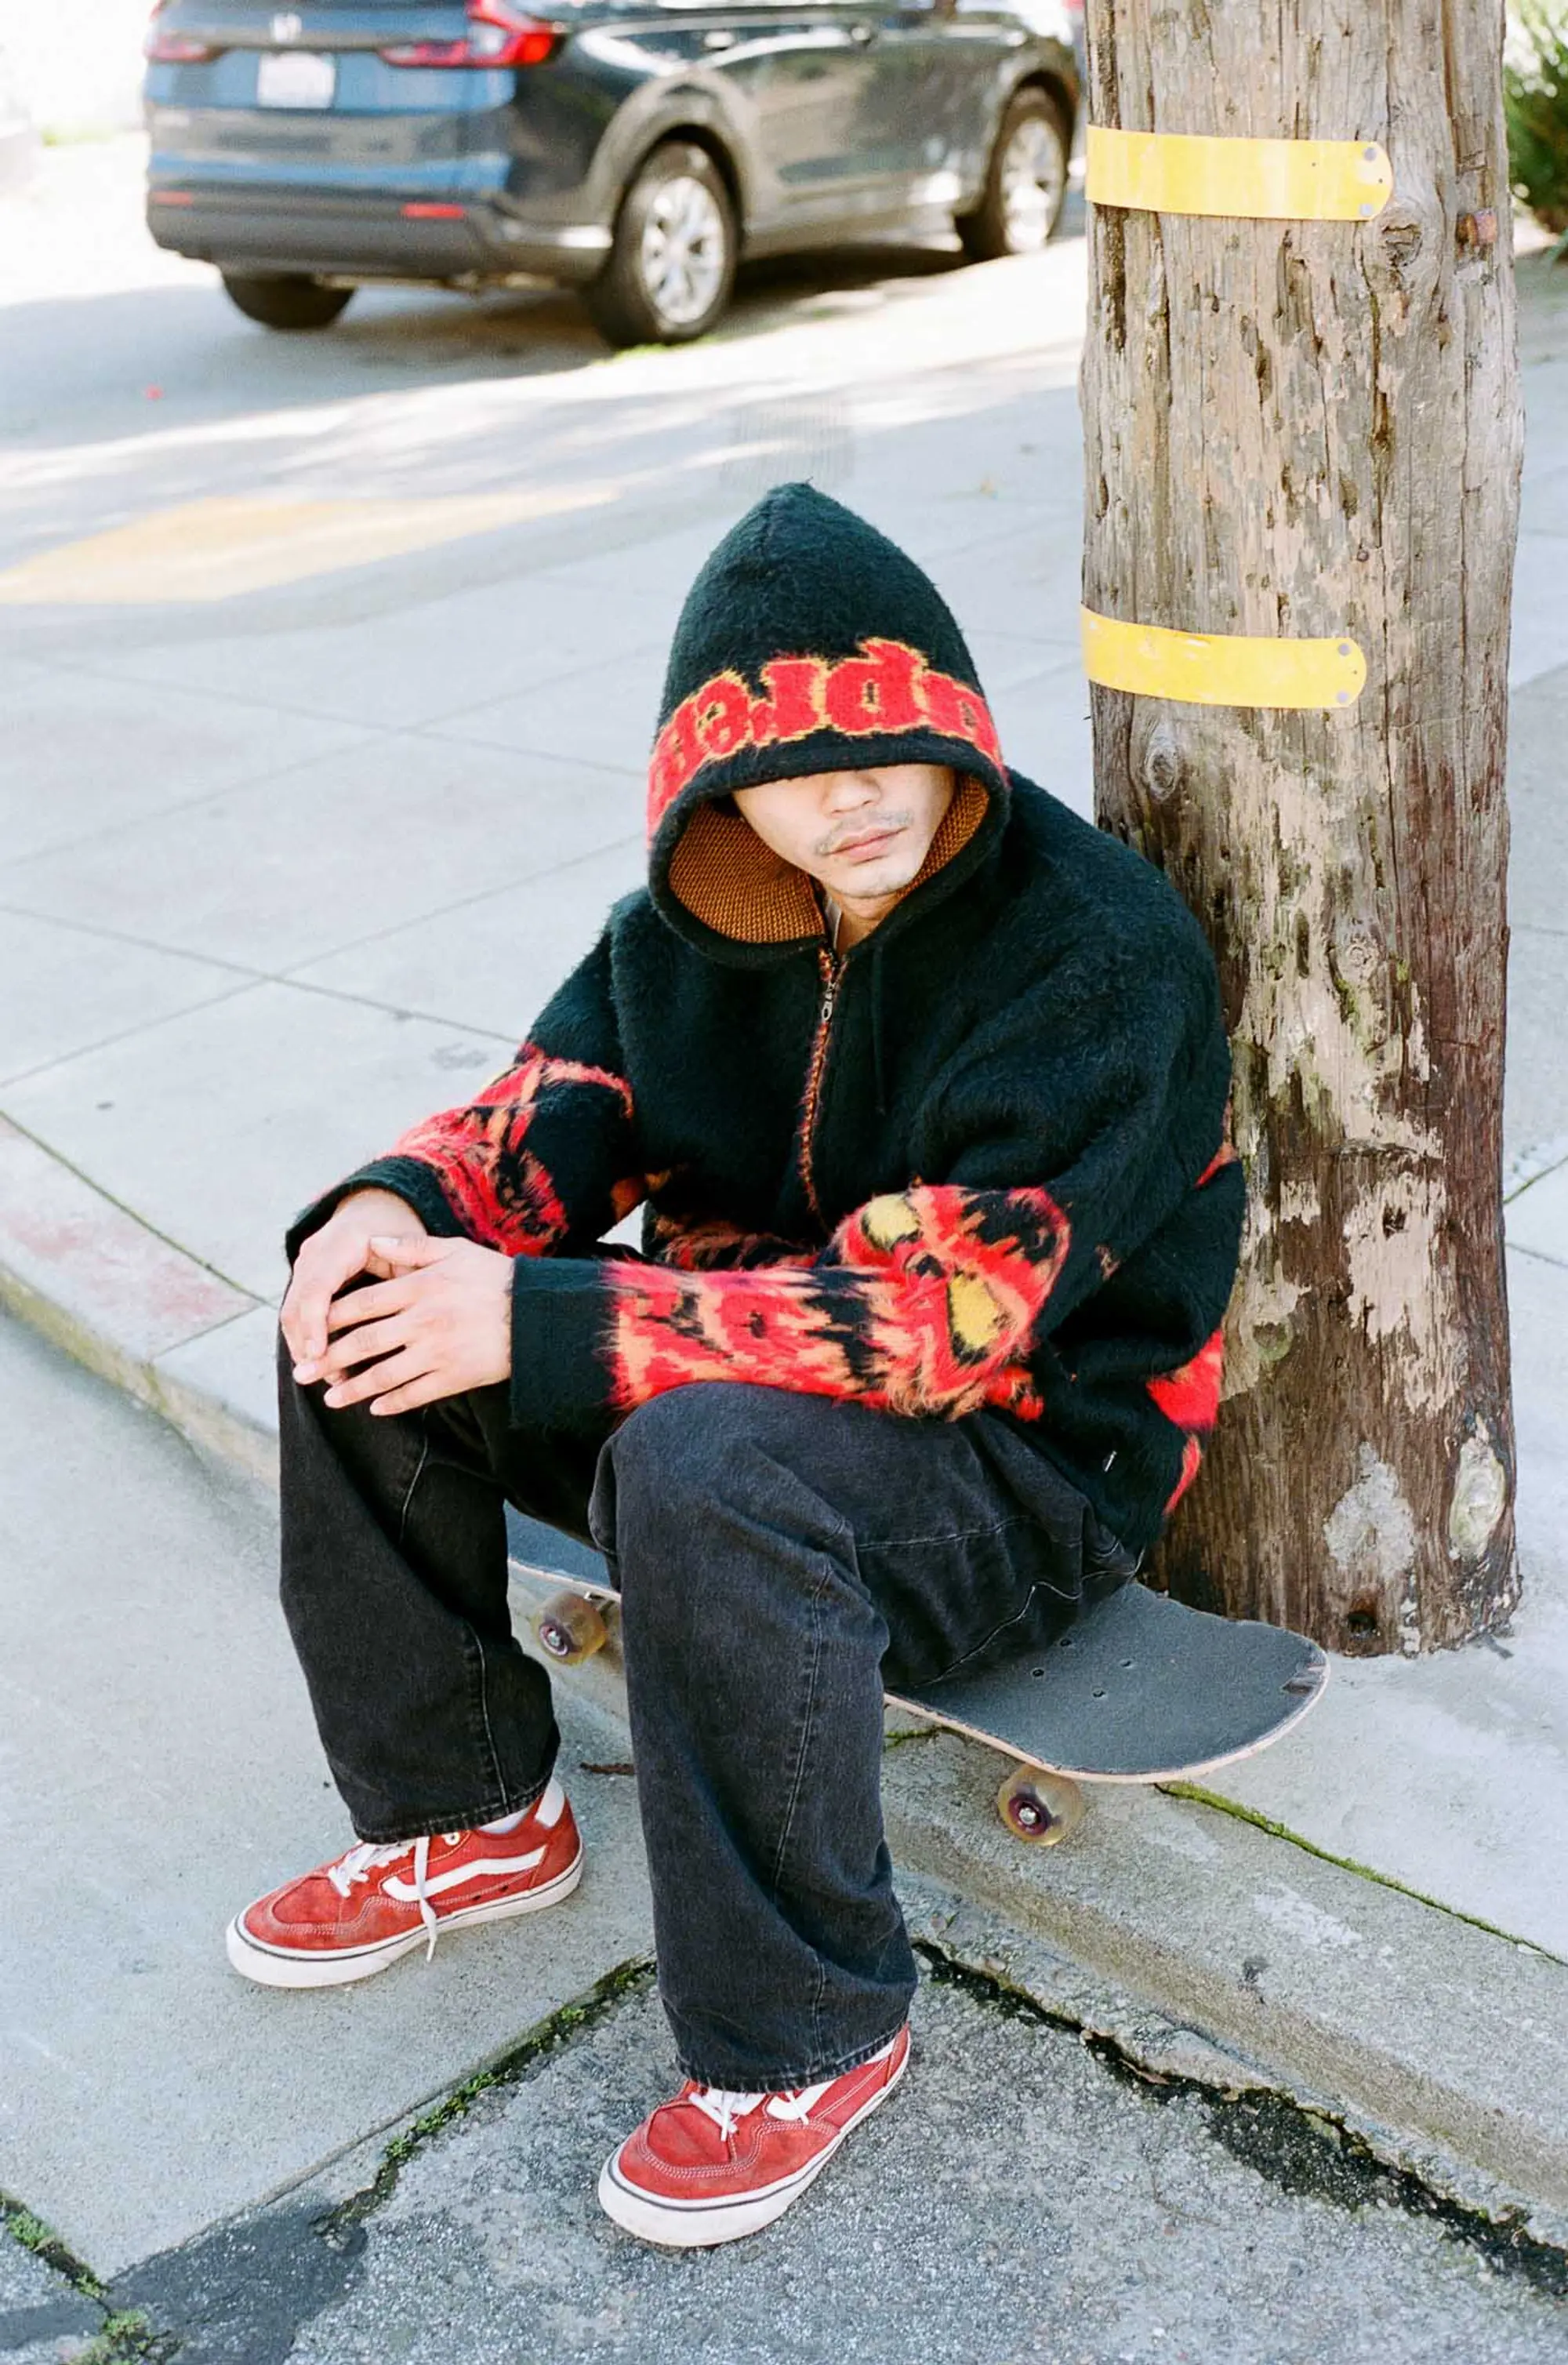 Supreme/Toy Machine Zip Up Hooded Sweater | Supreme 24ss